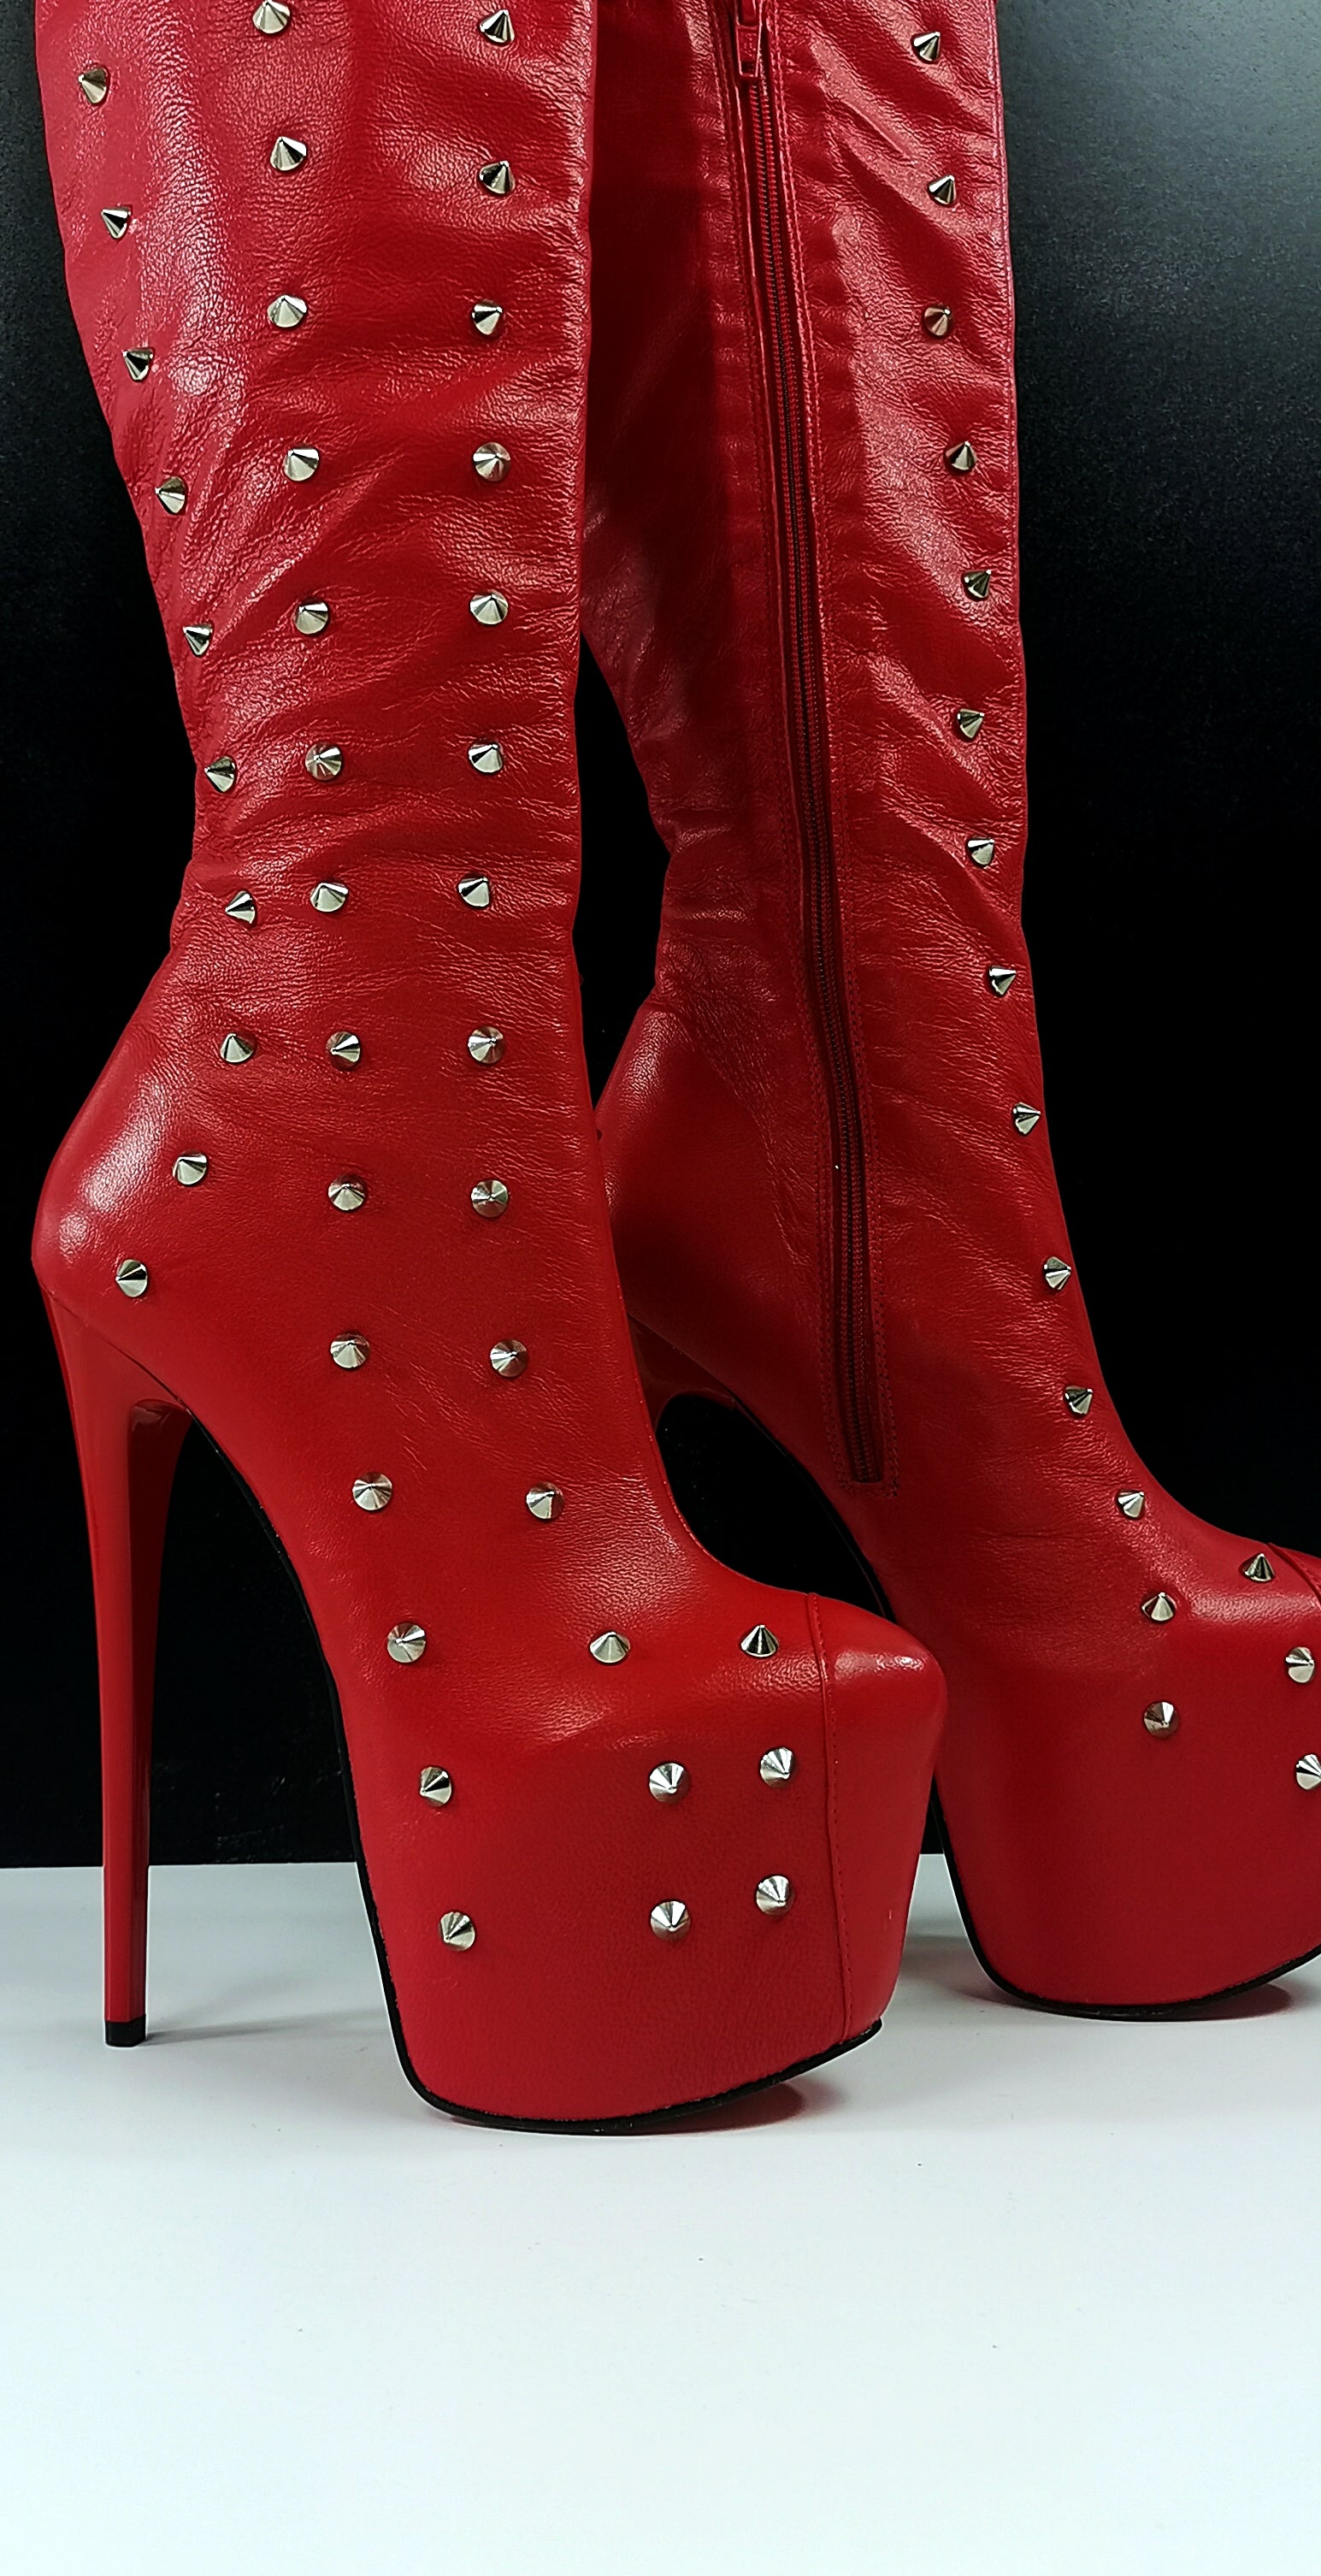 Spike Stud Red Genuine Leather Thigh Boots - Tajna Club